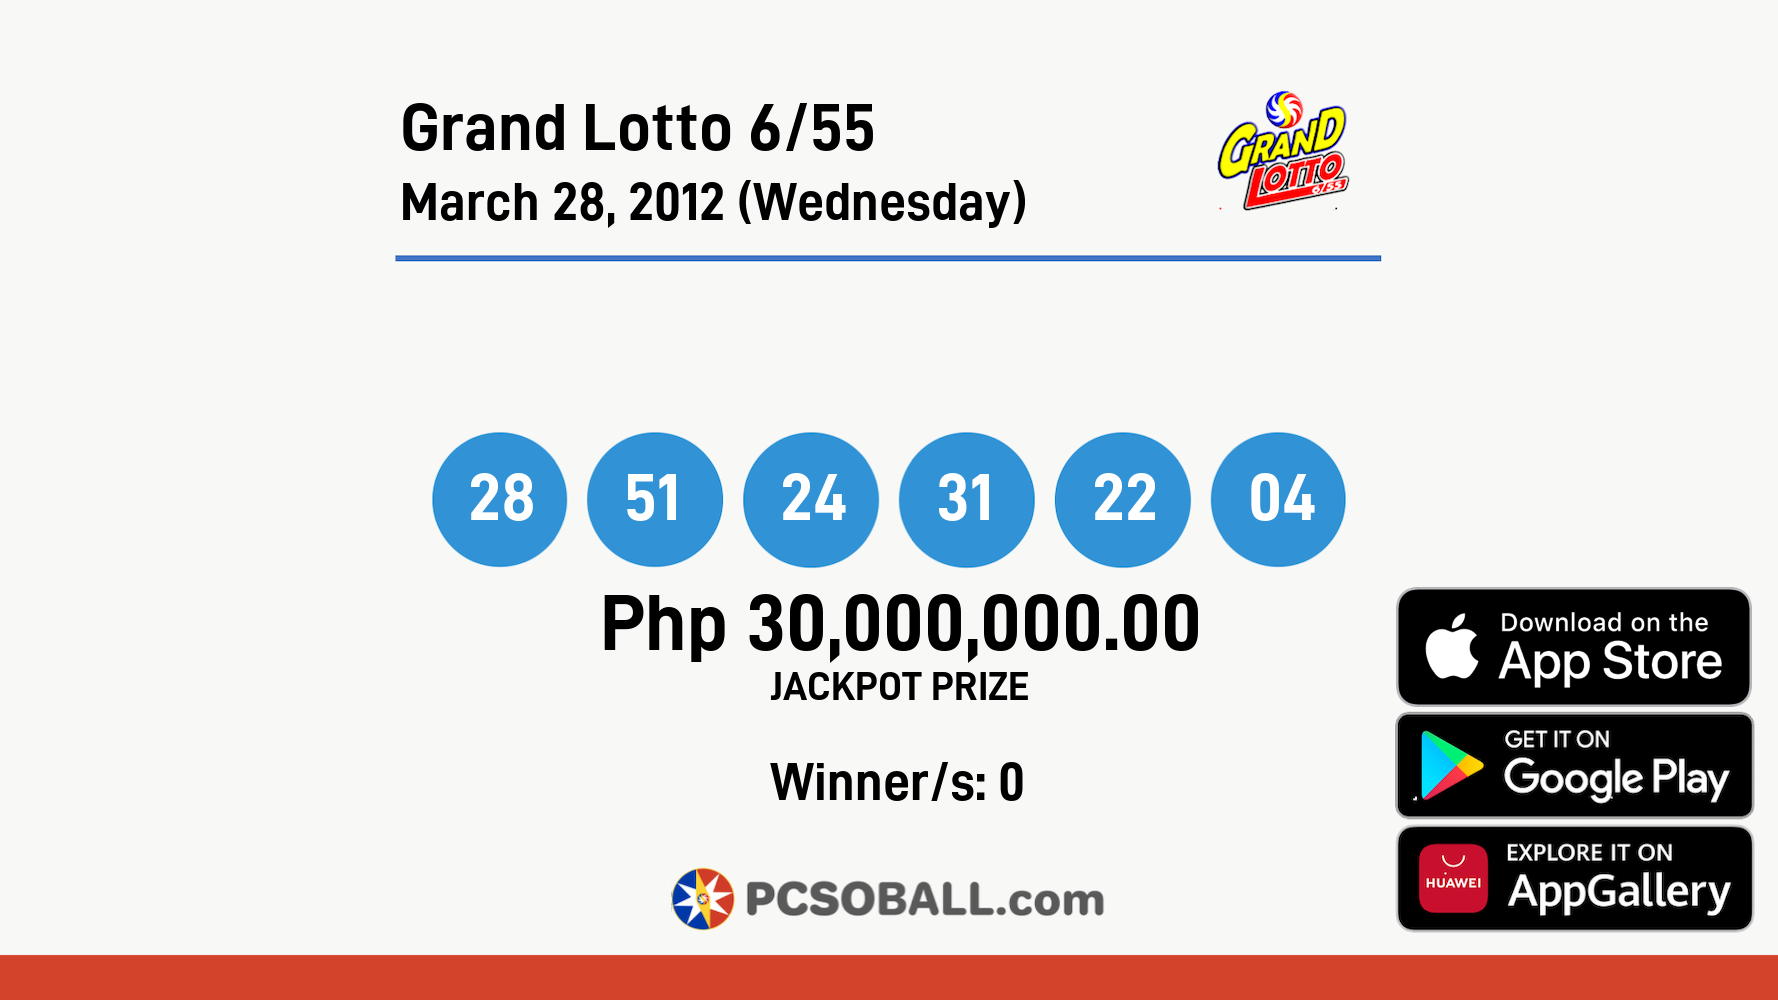 Grand Lotto 6/55 March 28, 2012 (Wednesday) Result